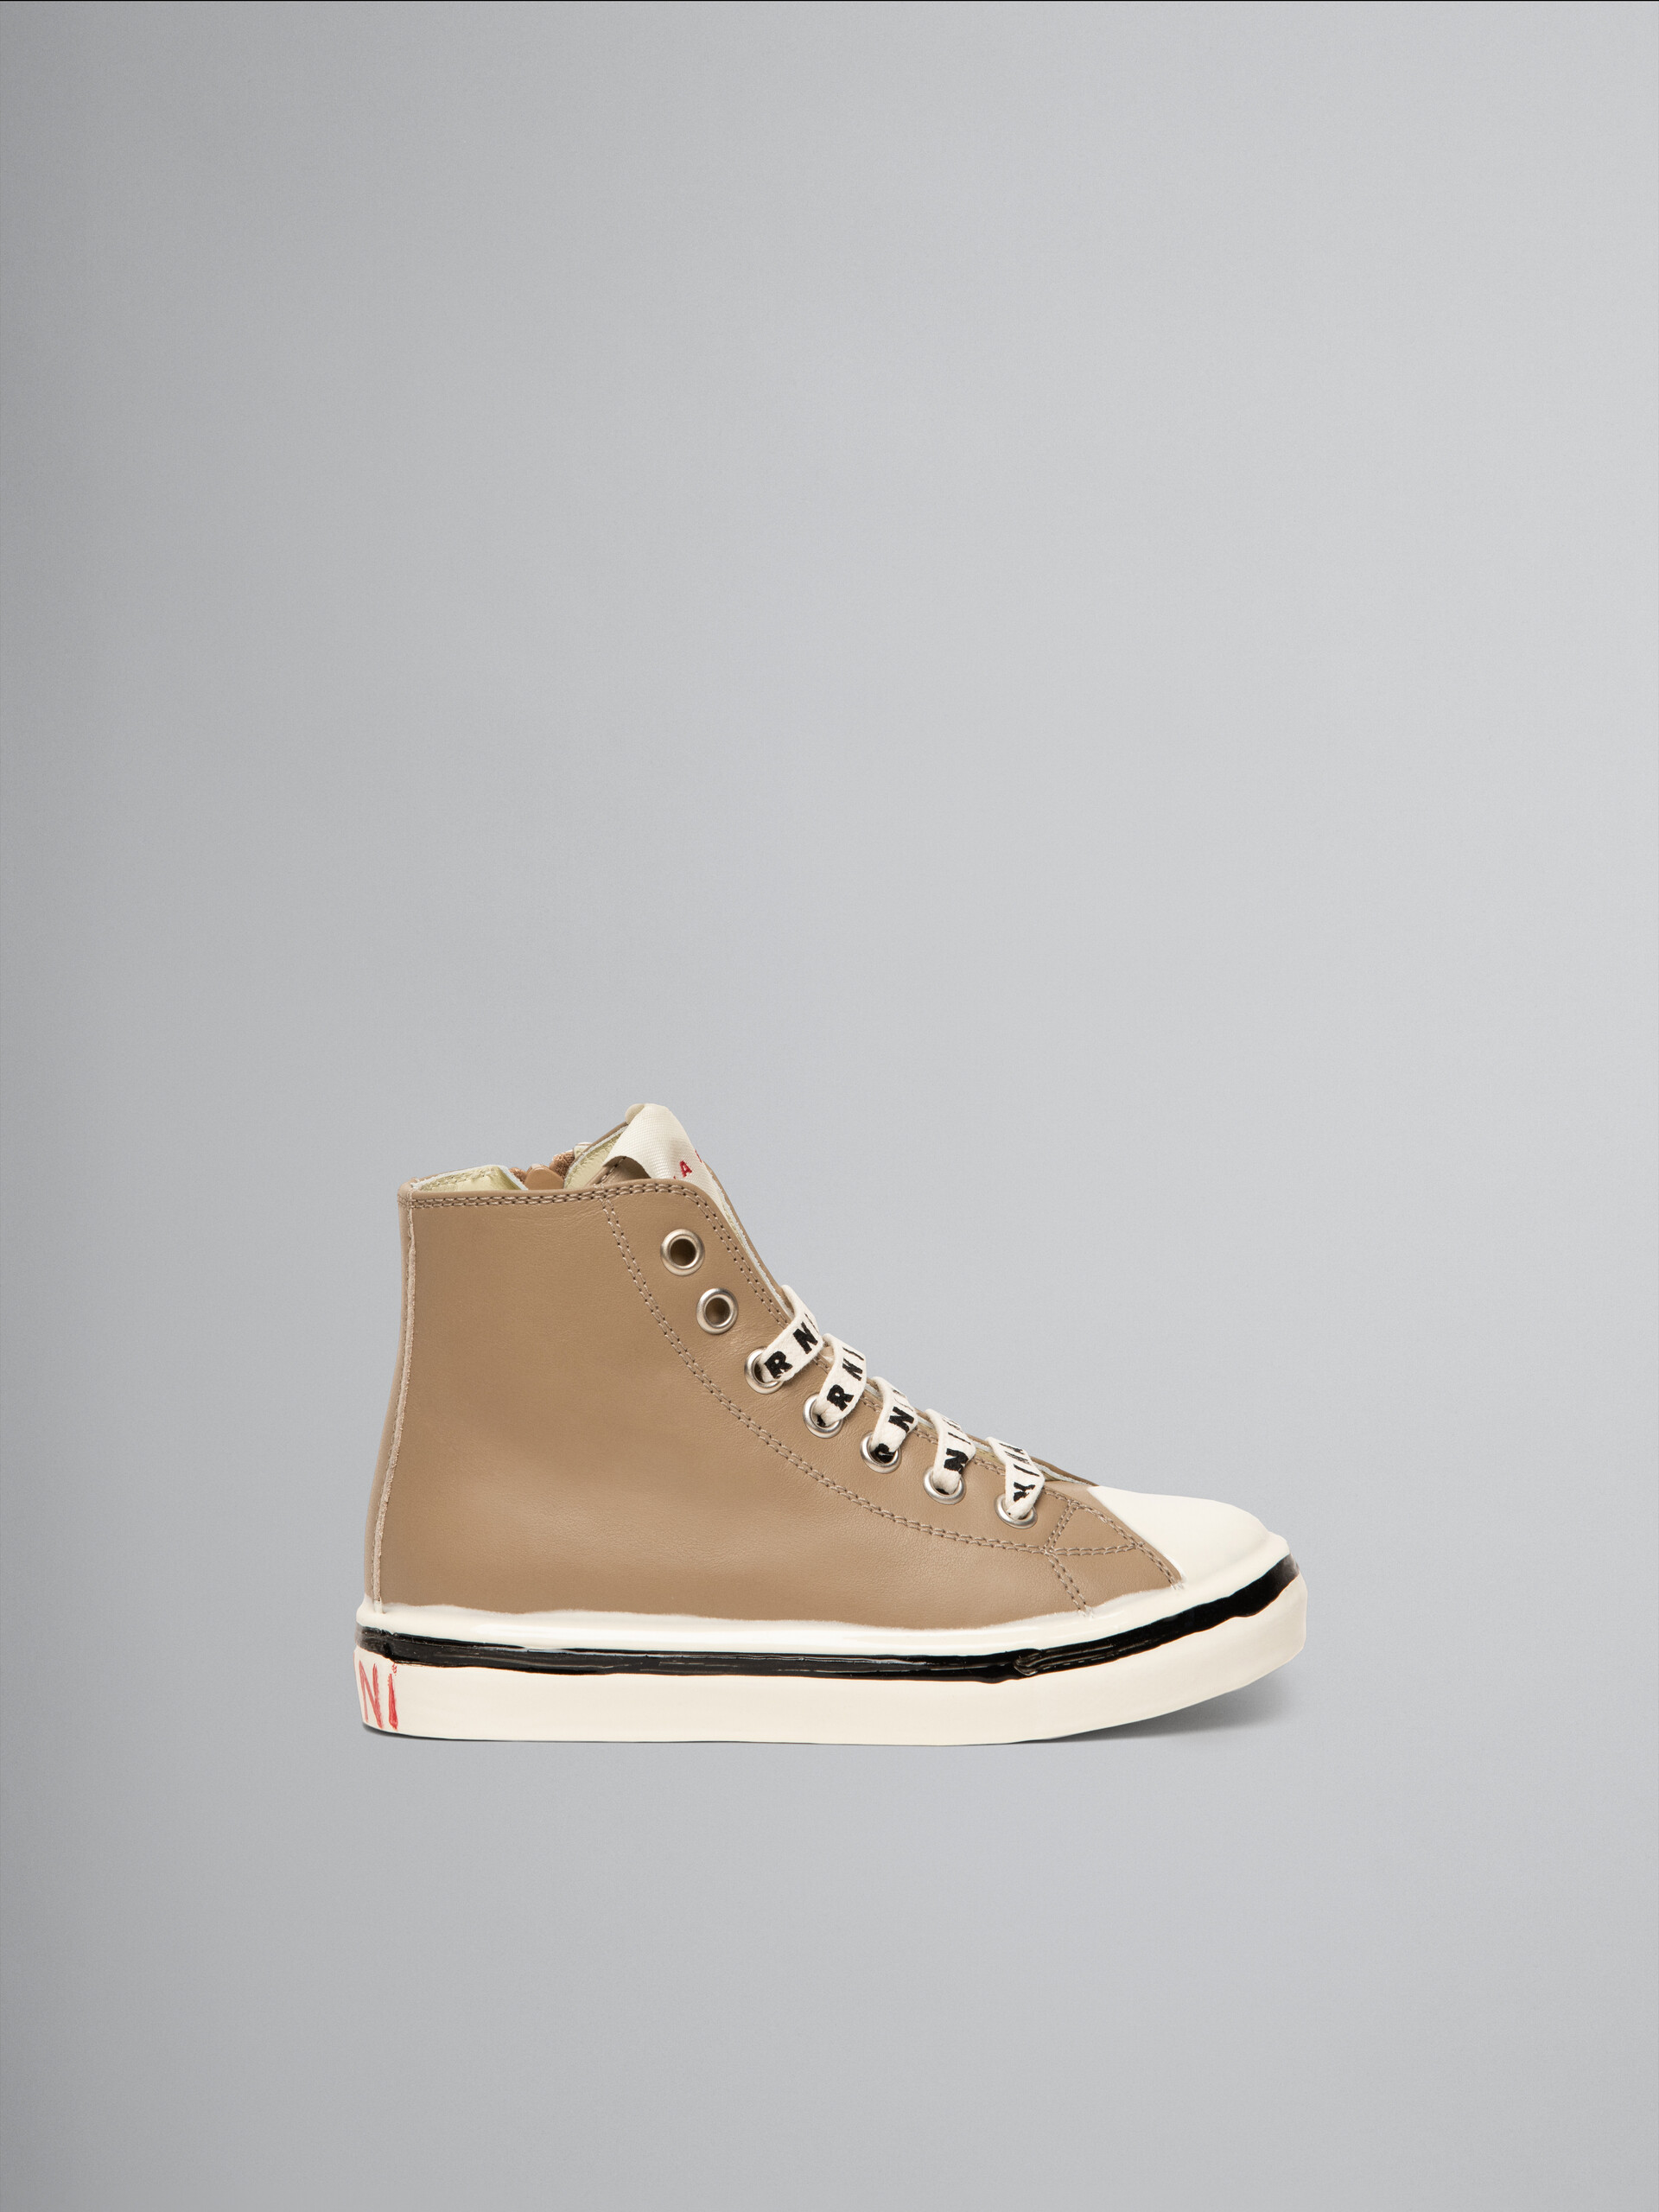 Brown leather sneaker - Other accessories - Image 1